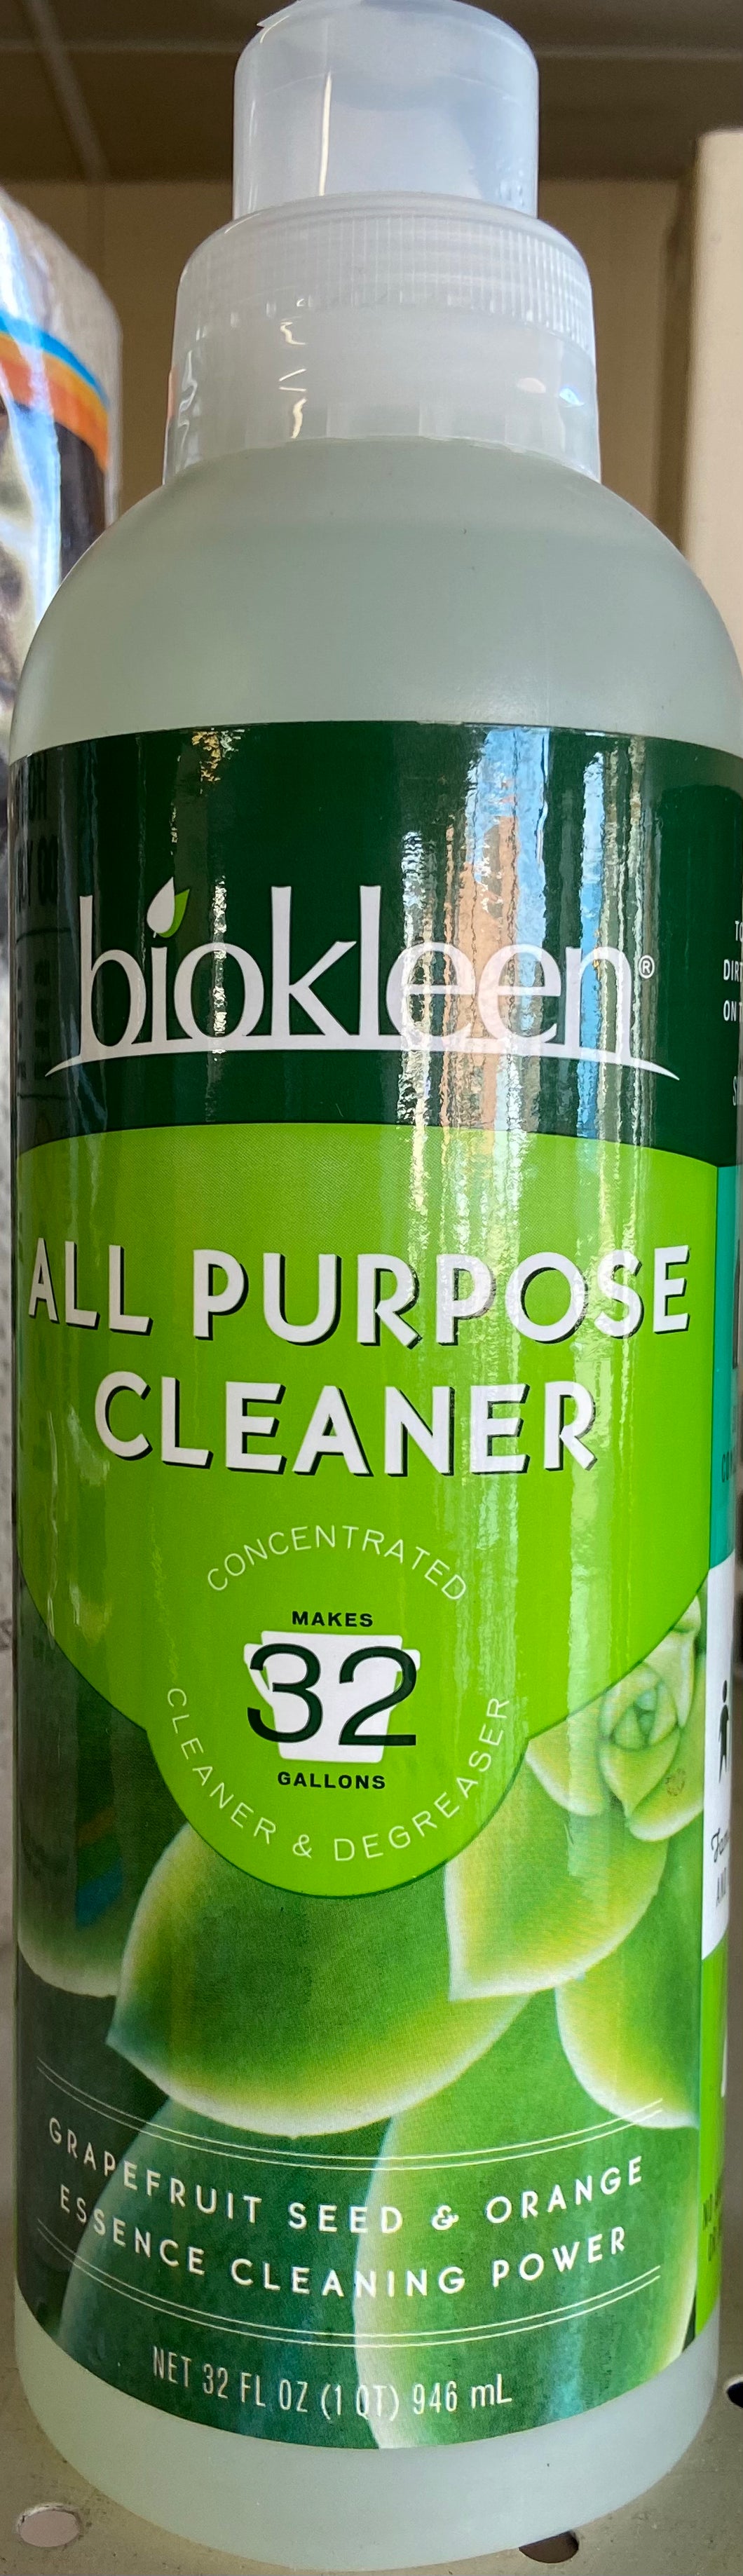 Cleaner, All Purpose, Concentrated, biokleen